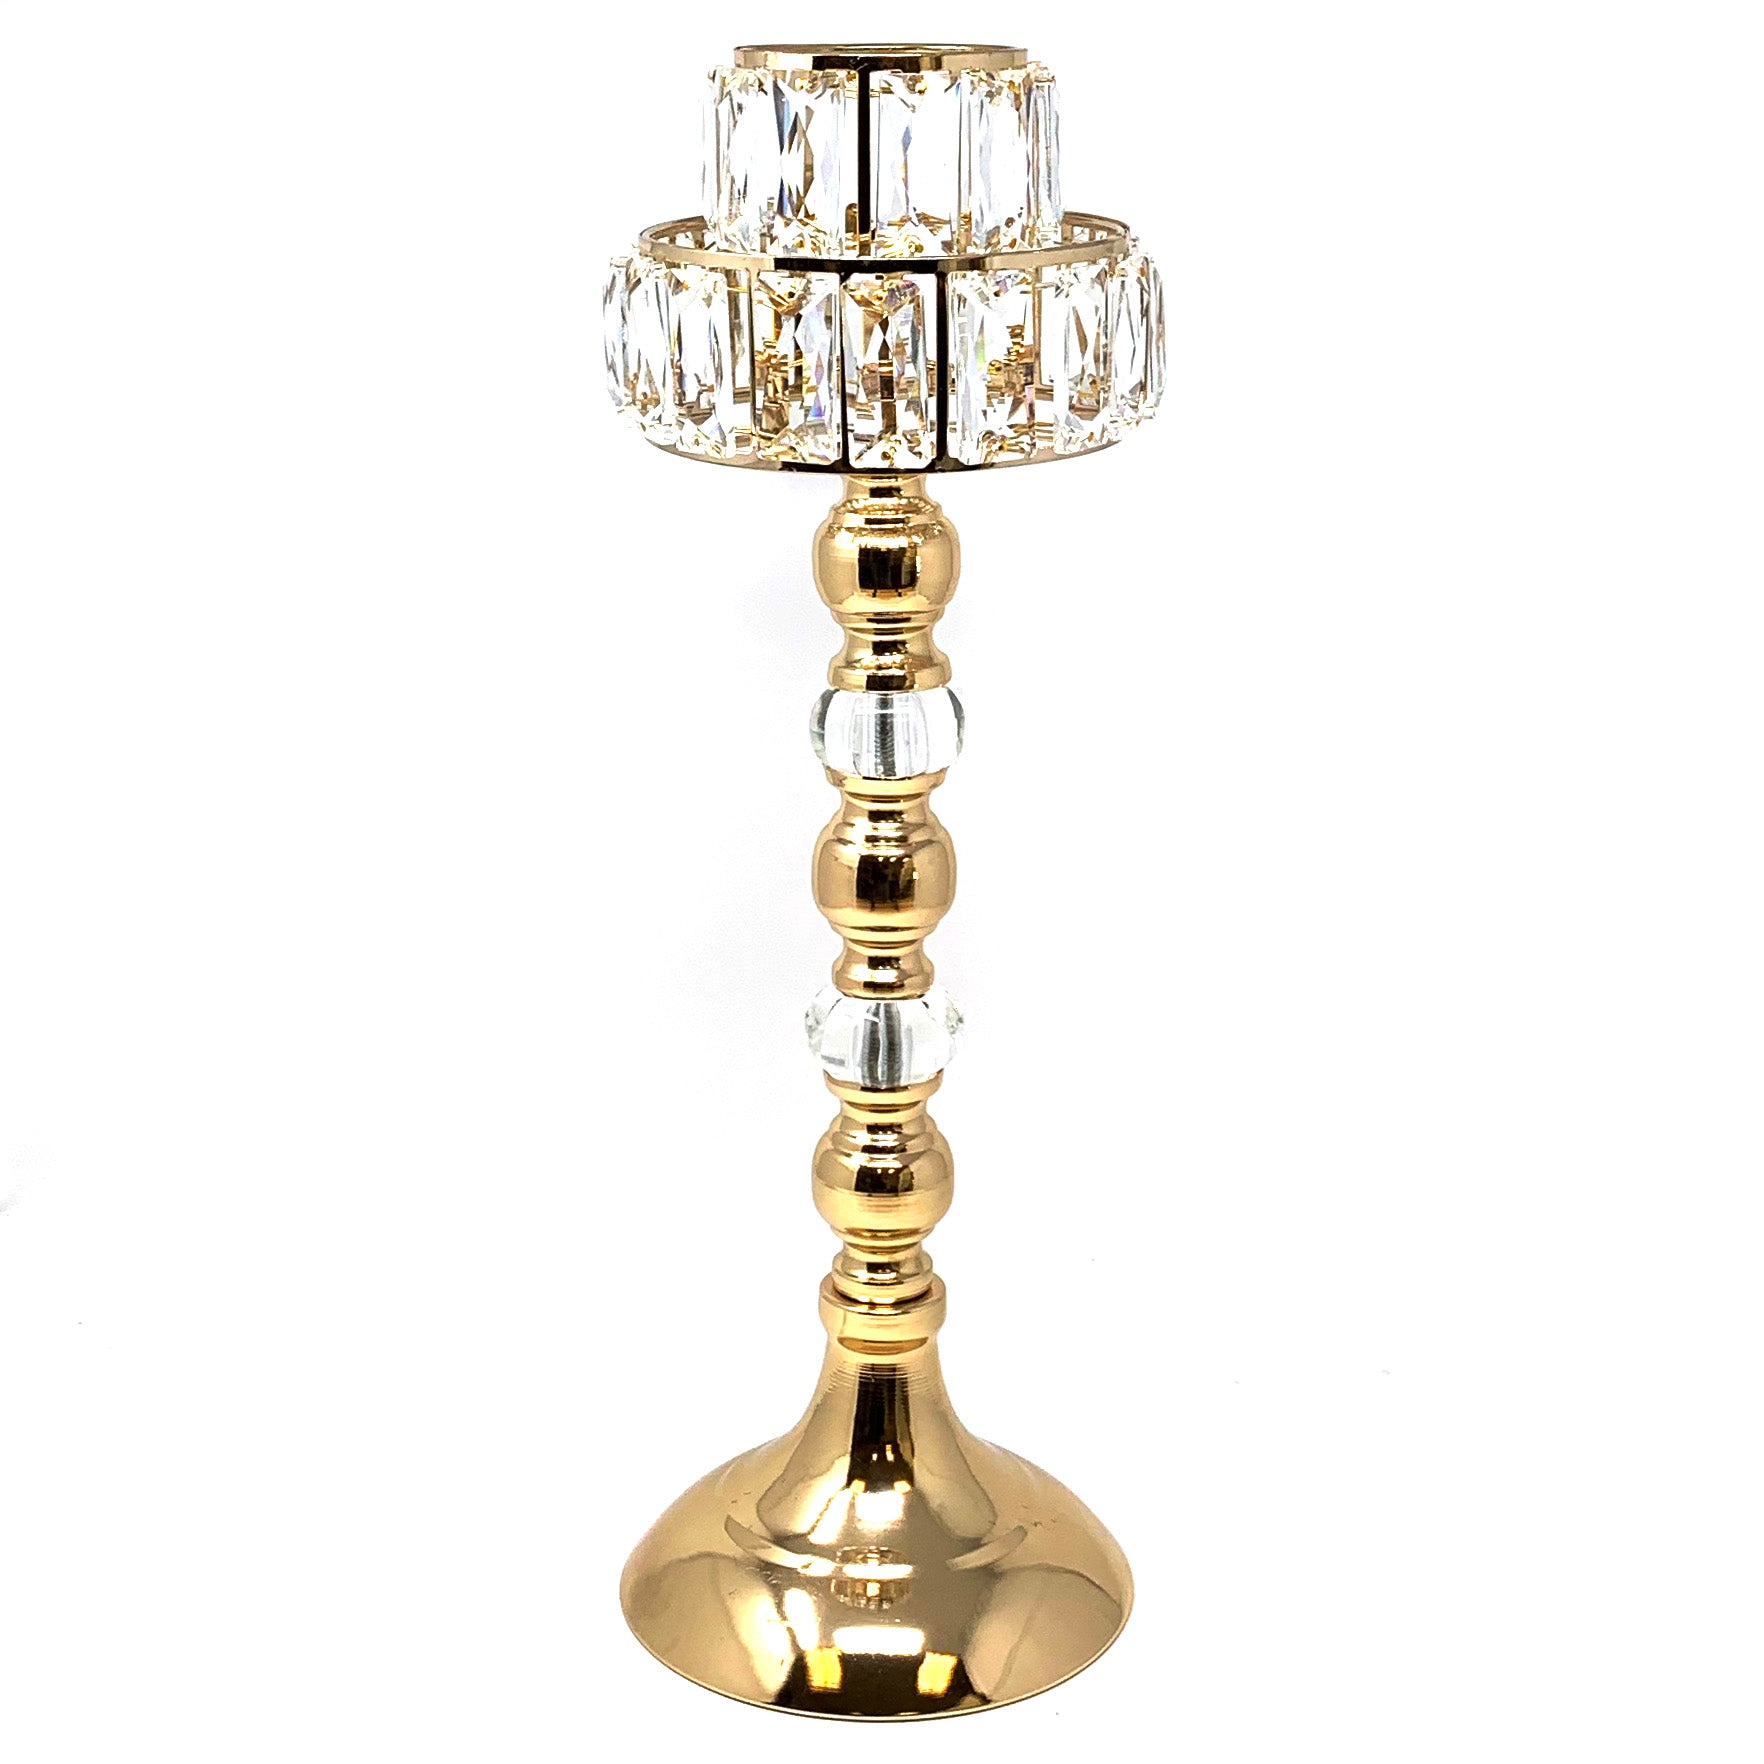 Allgala Candle Holder 19 Lamp Style Gold Tealight Candle Holder with